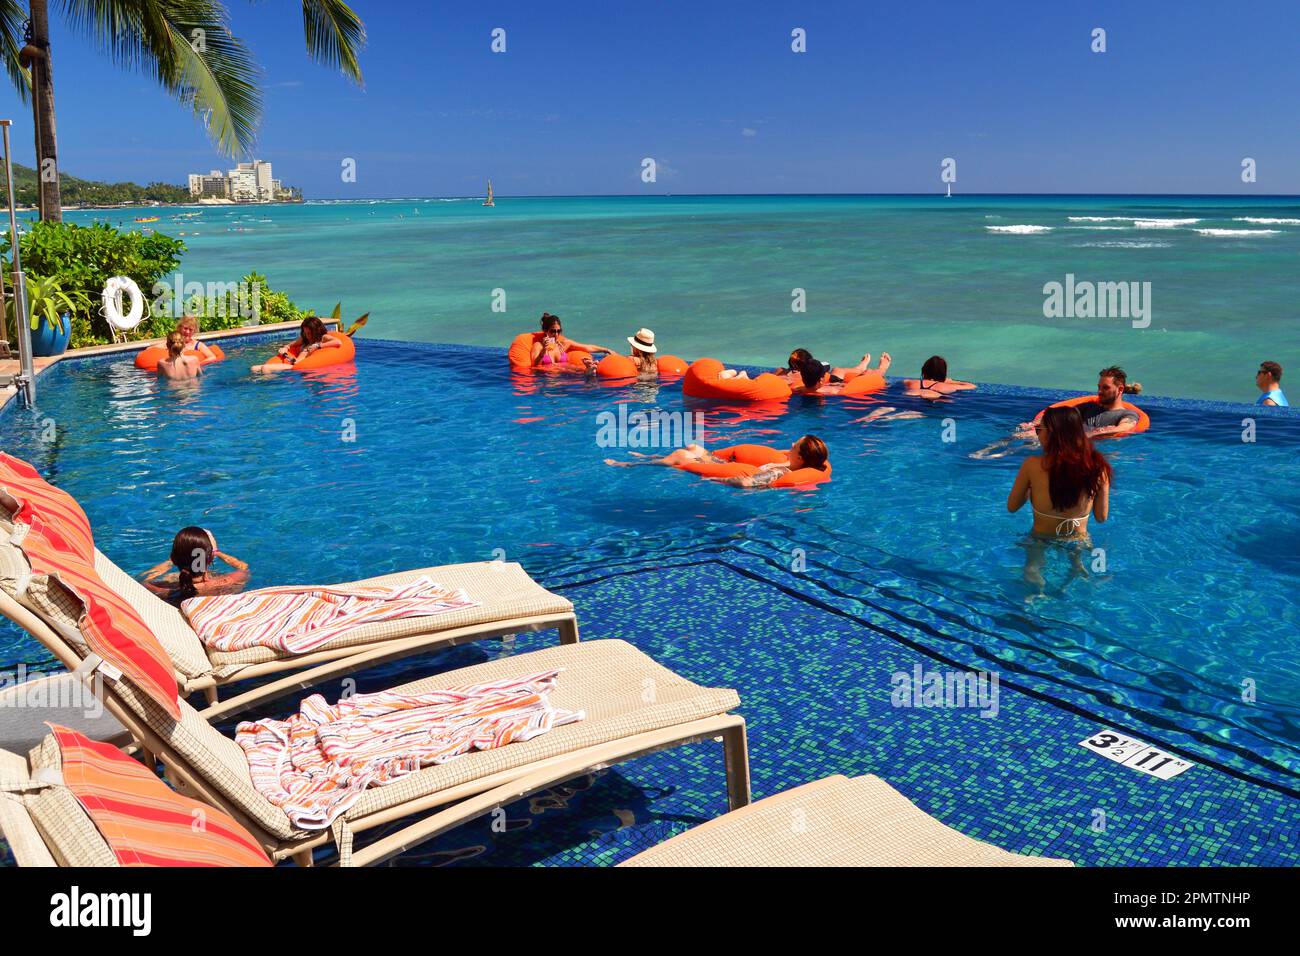 Hotel guests and vacation goers enjoy swimming in an infinity pool on a shore front resort on Waikiki Beach, Hawaii Stock Photo